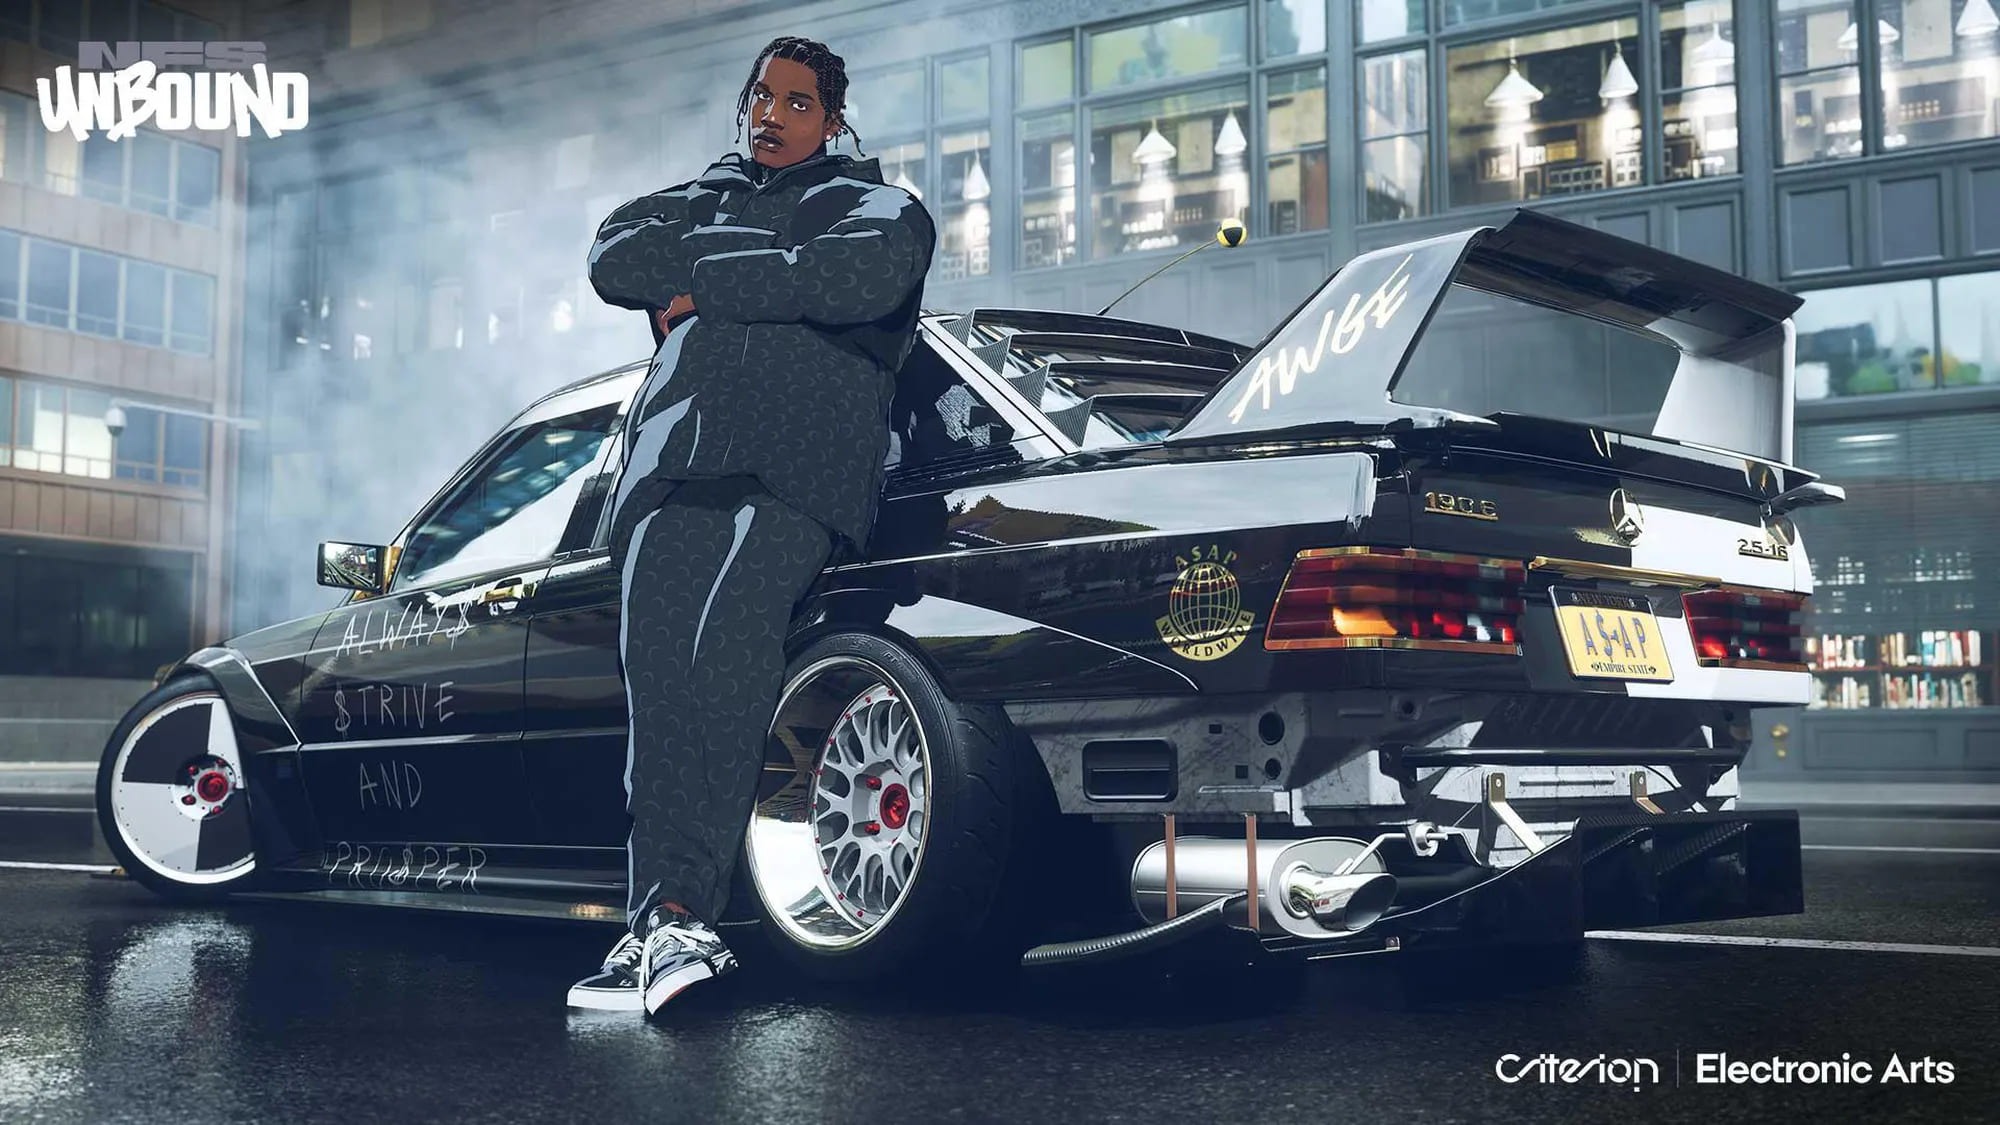 A$AP Rocky became a new character in Need For Speed Unbound.